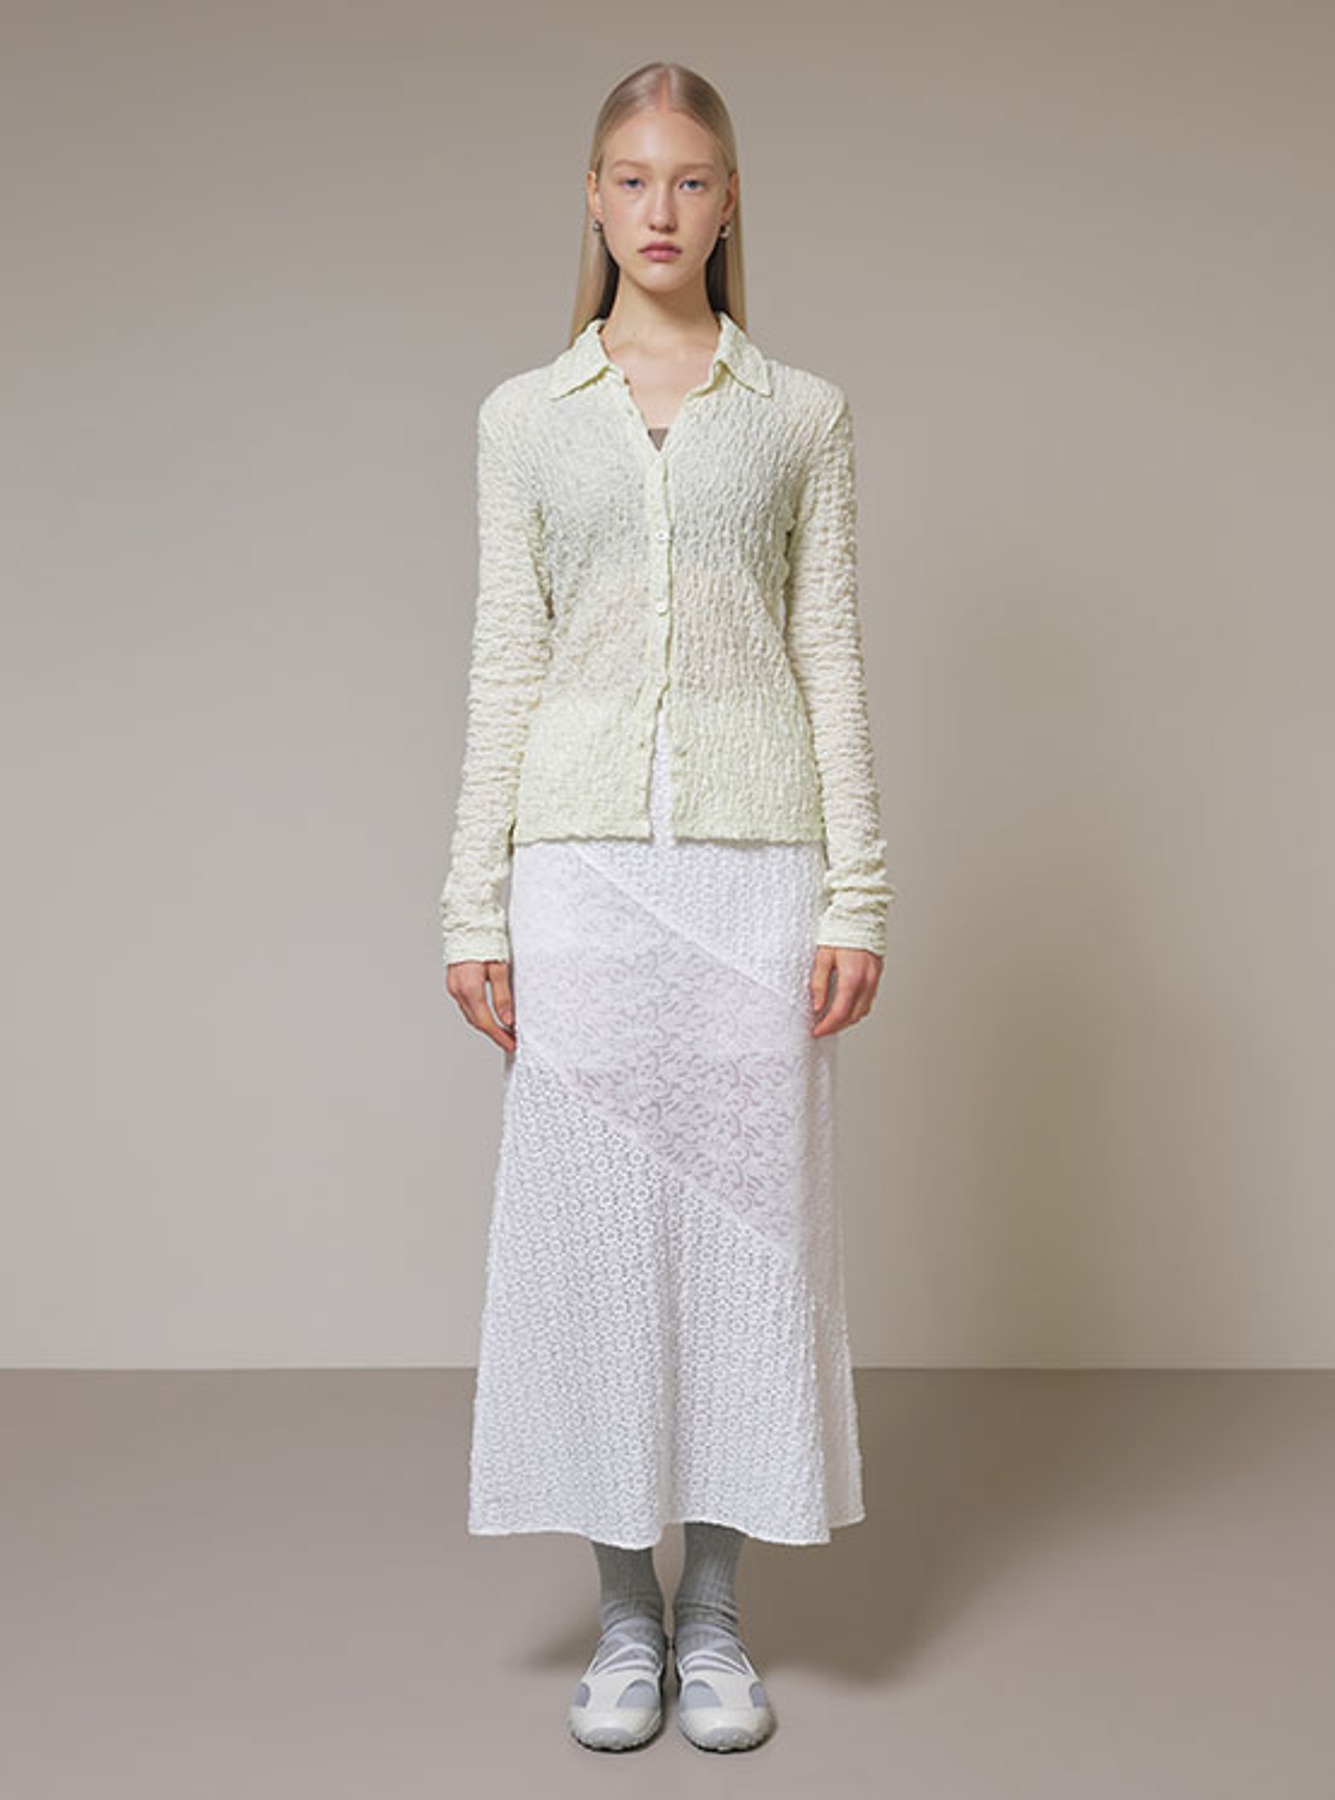 Lace Long Skirt in White VW4SS127-01